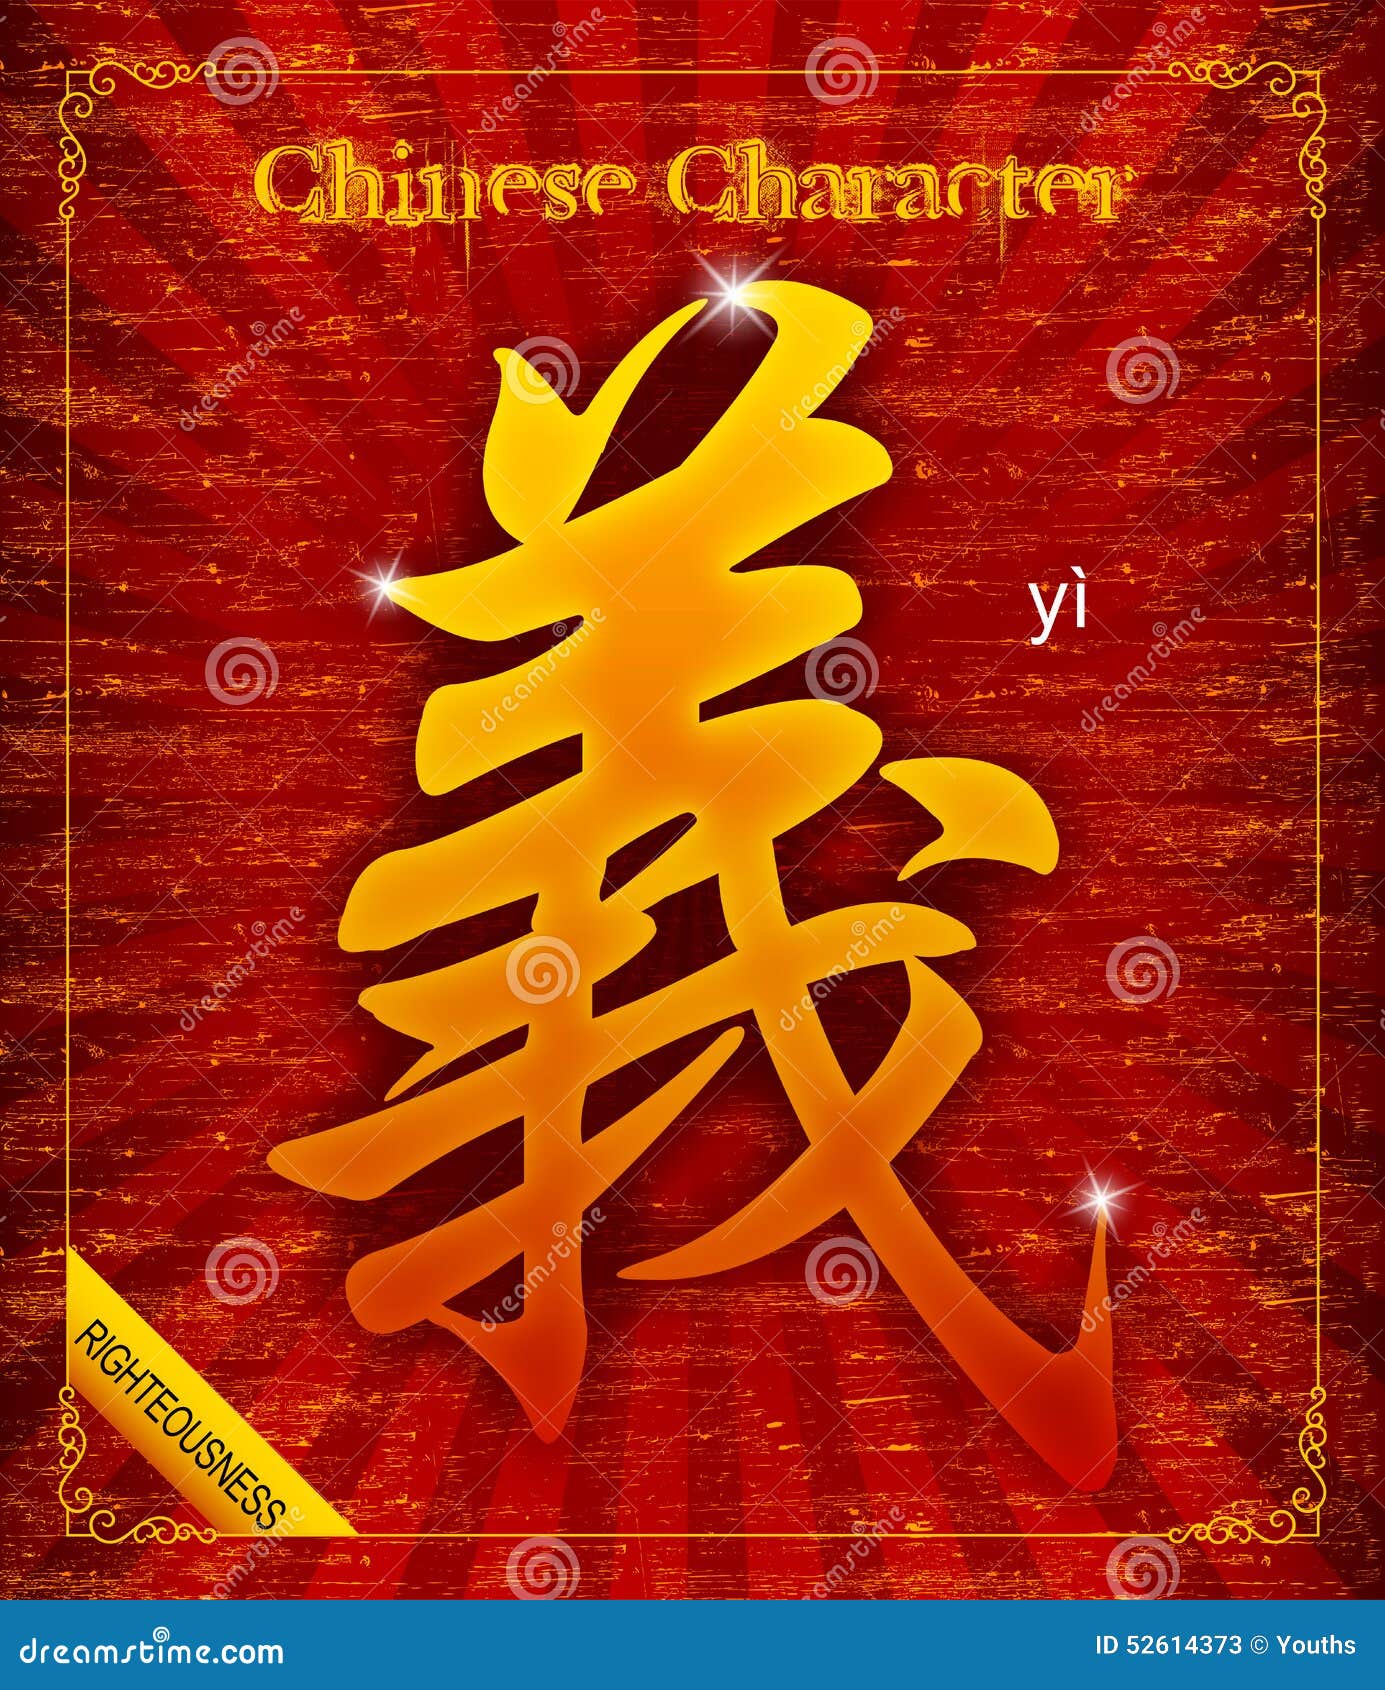  chinese character  about: righteousness or justice